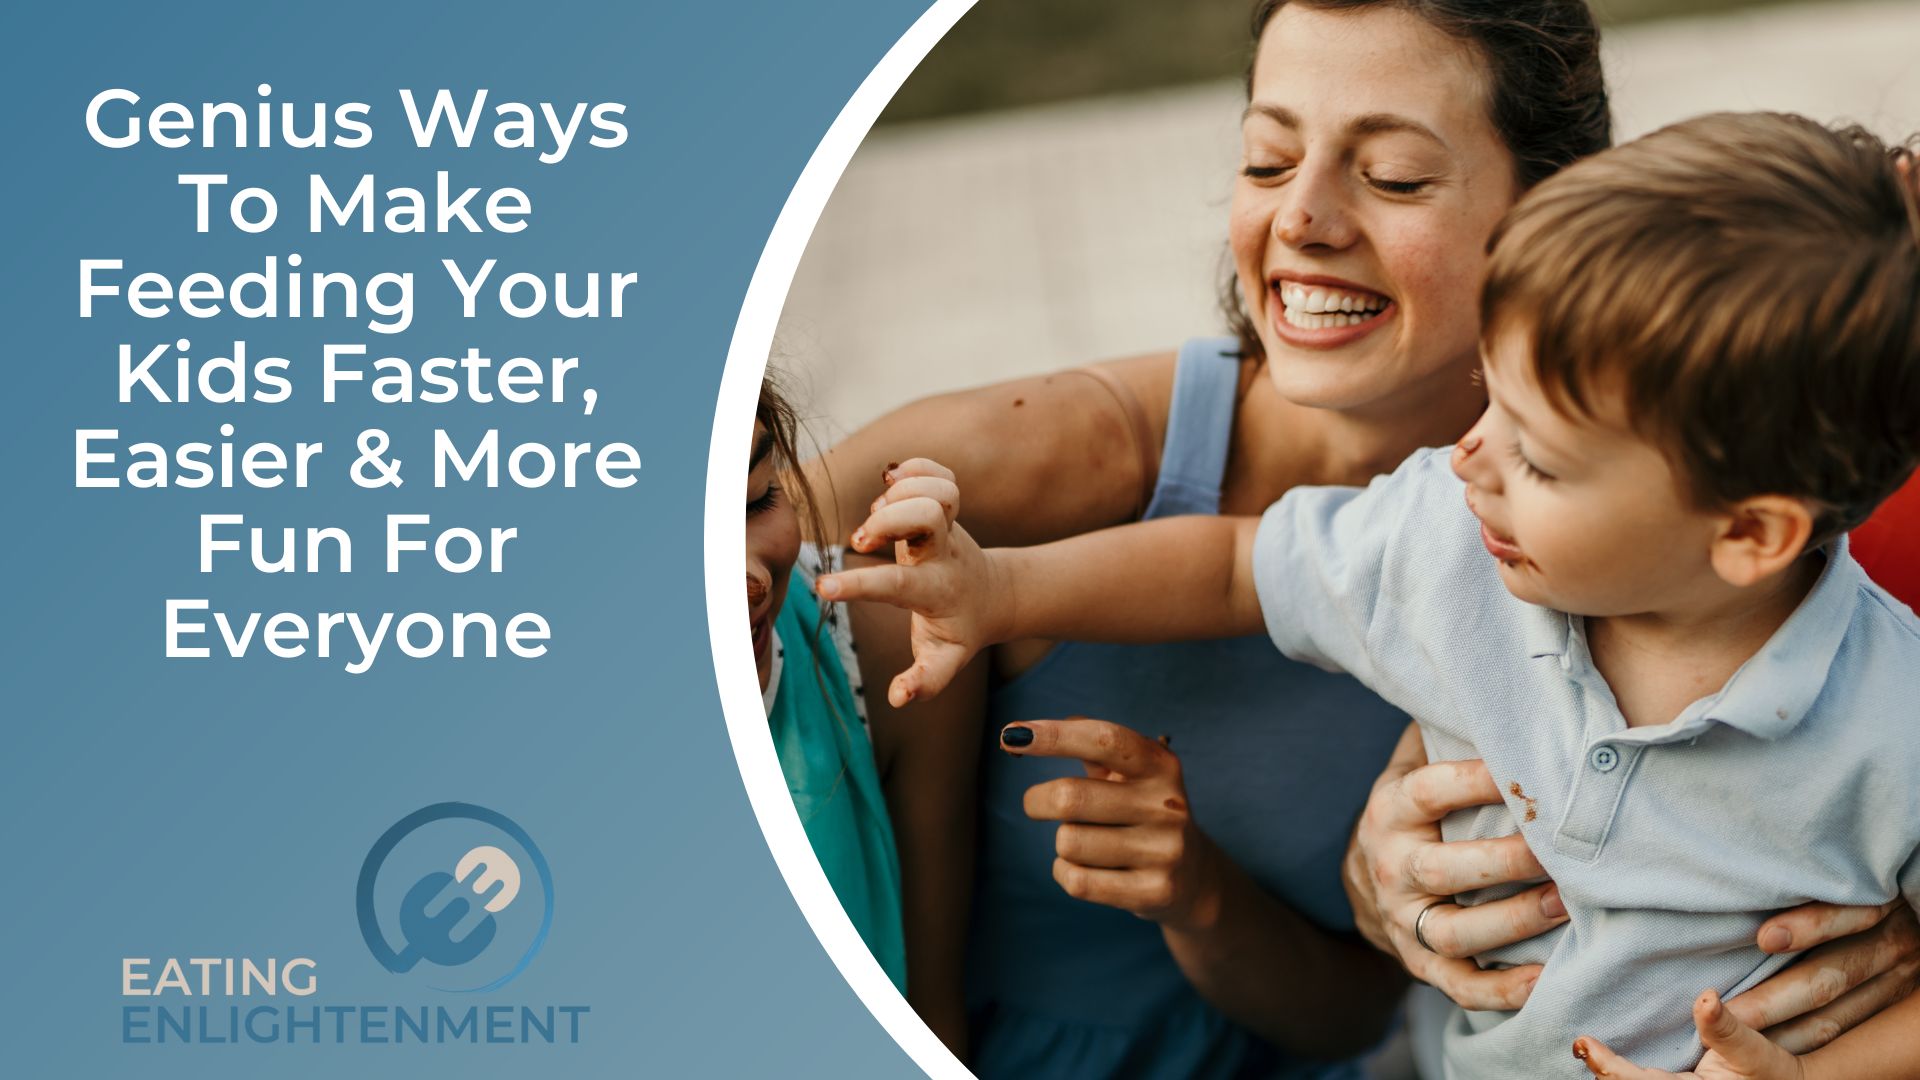 5 Genius Ways To Make Feeding Your Kids Faster, Easier & More Fun For Everyone